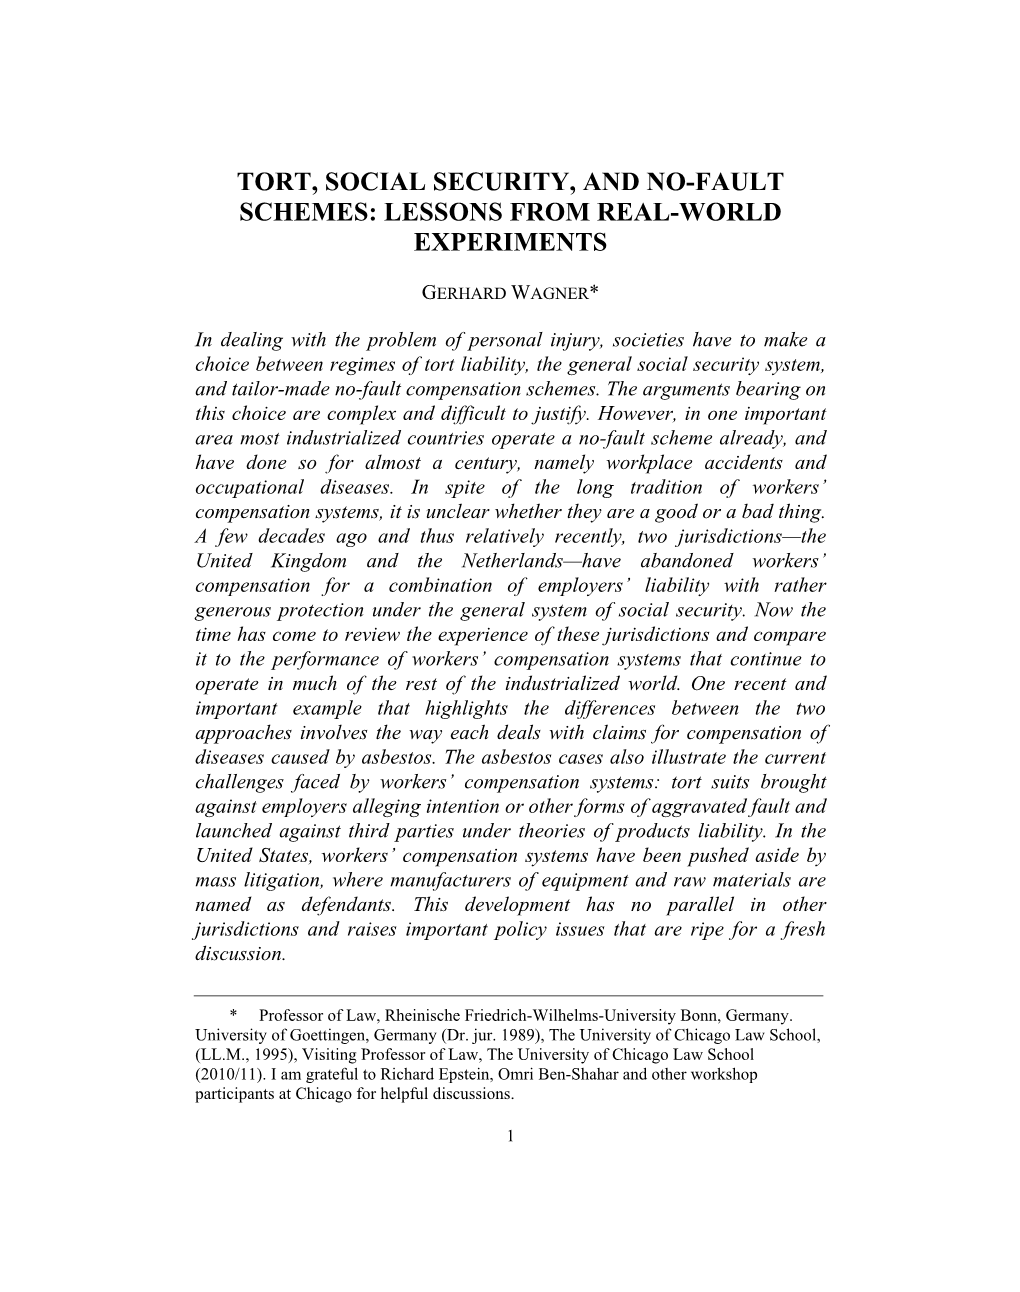 Tort, Social Security, and No-Fault Schemes: Lessons from Real-World Experiments